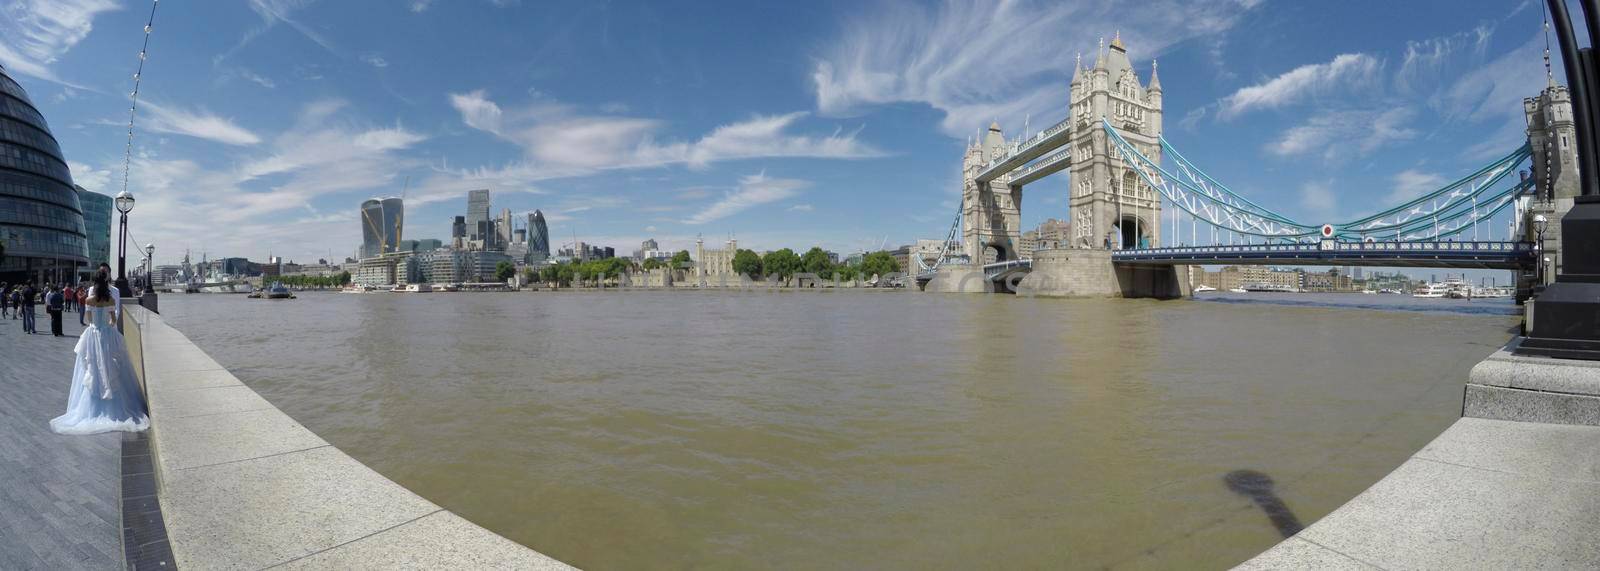 Tower Bridge, Tower of London and Financial District of London, panning shot